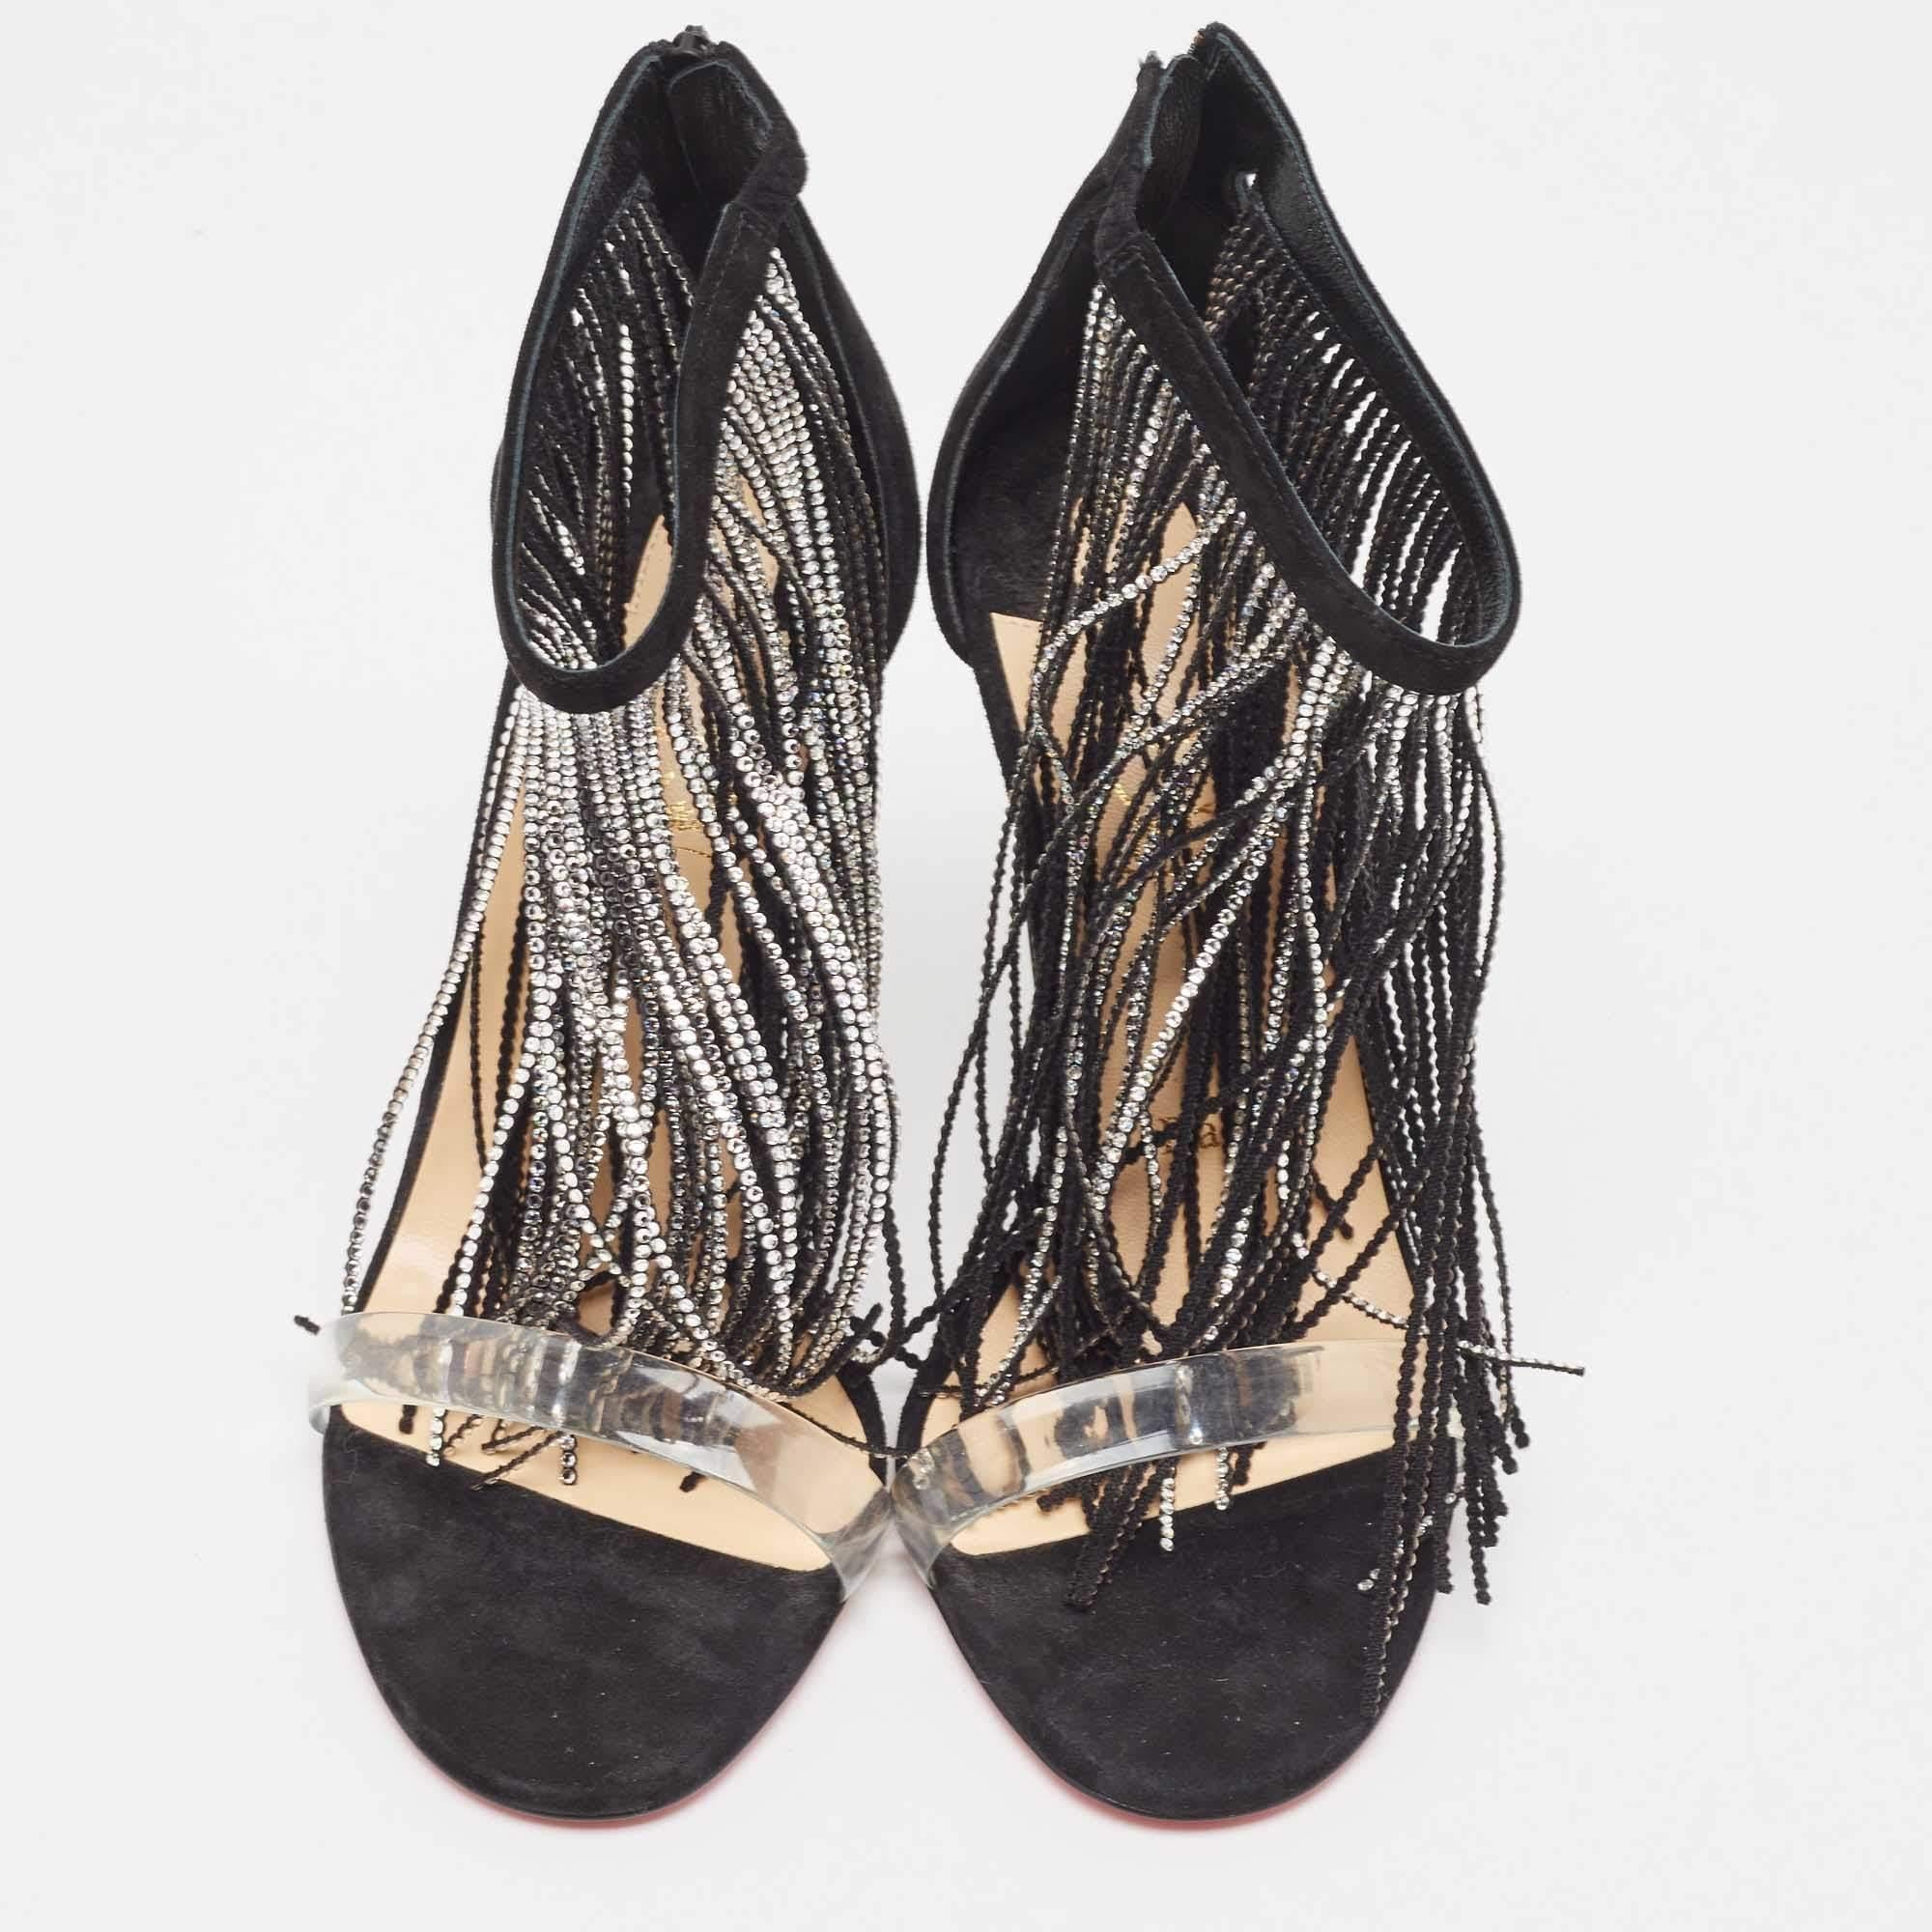 Christian Louboutin's sandals exude luxury with their black suede base, intricate crystal embellishments, and playful fringe detailing. The ankle strap adds a touch of sophistication, making it a glamorous statement piece.

Includes: Original Dustbag